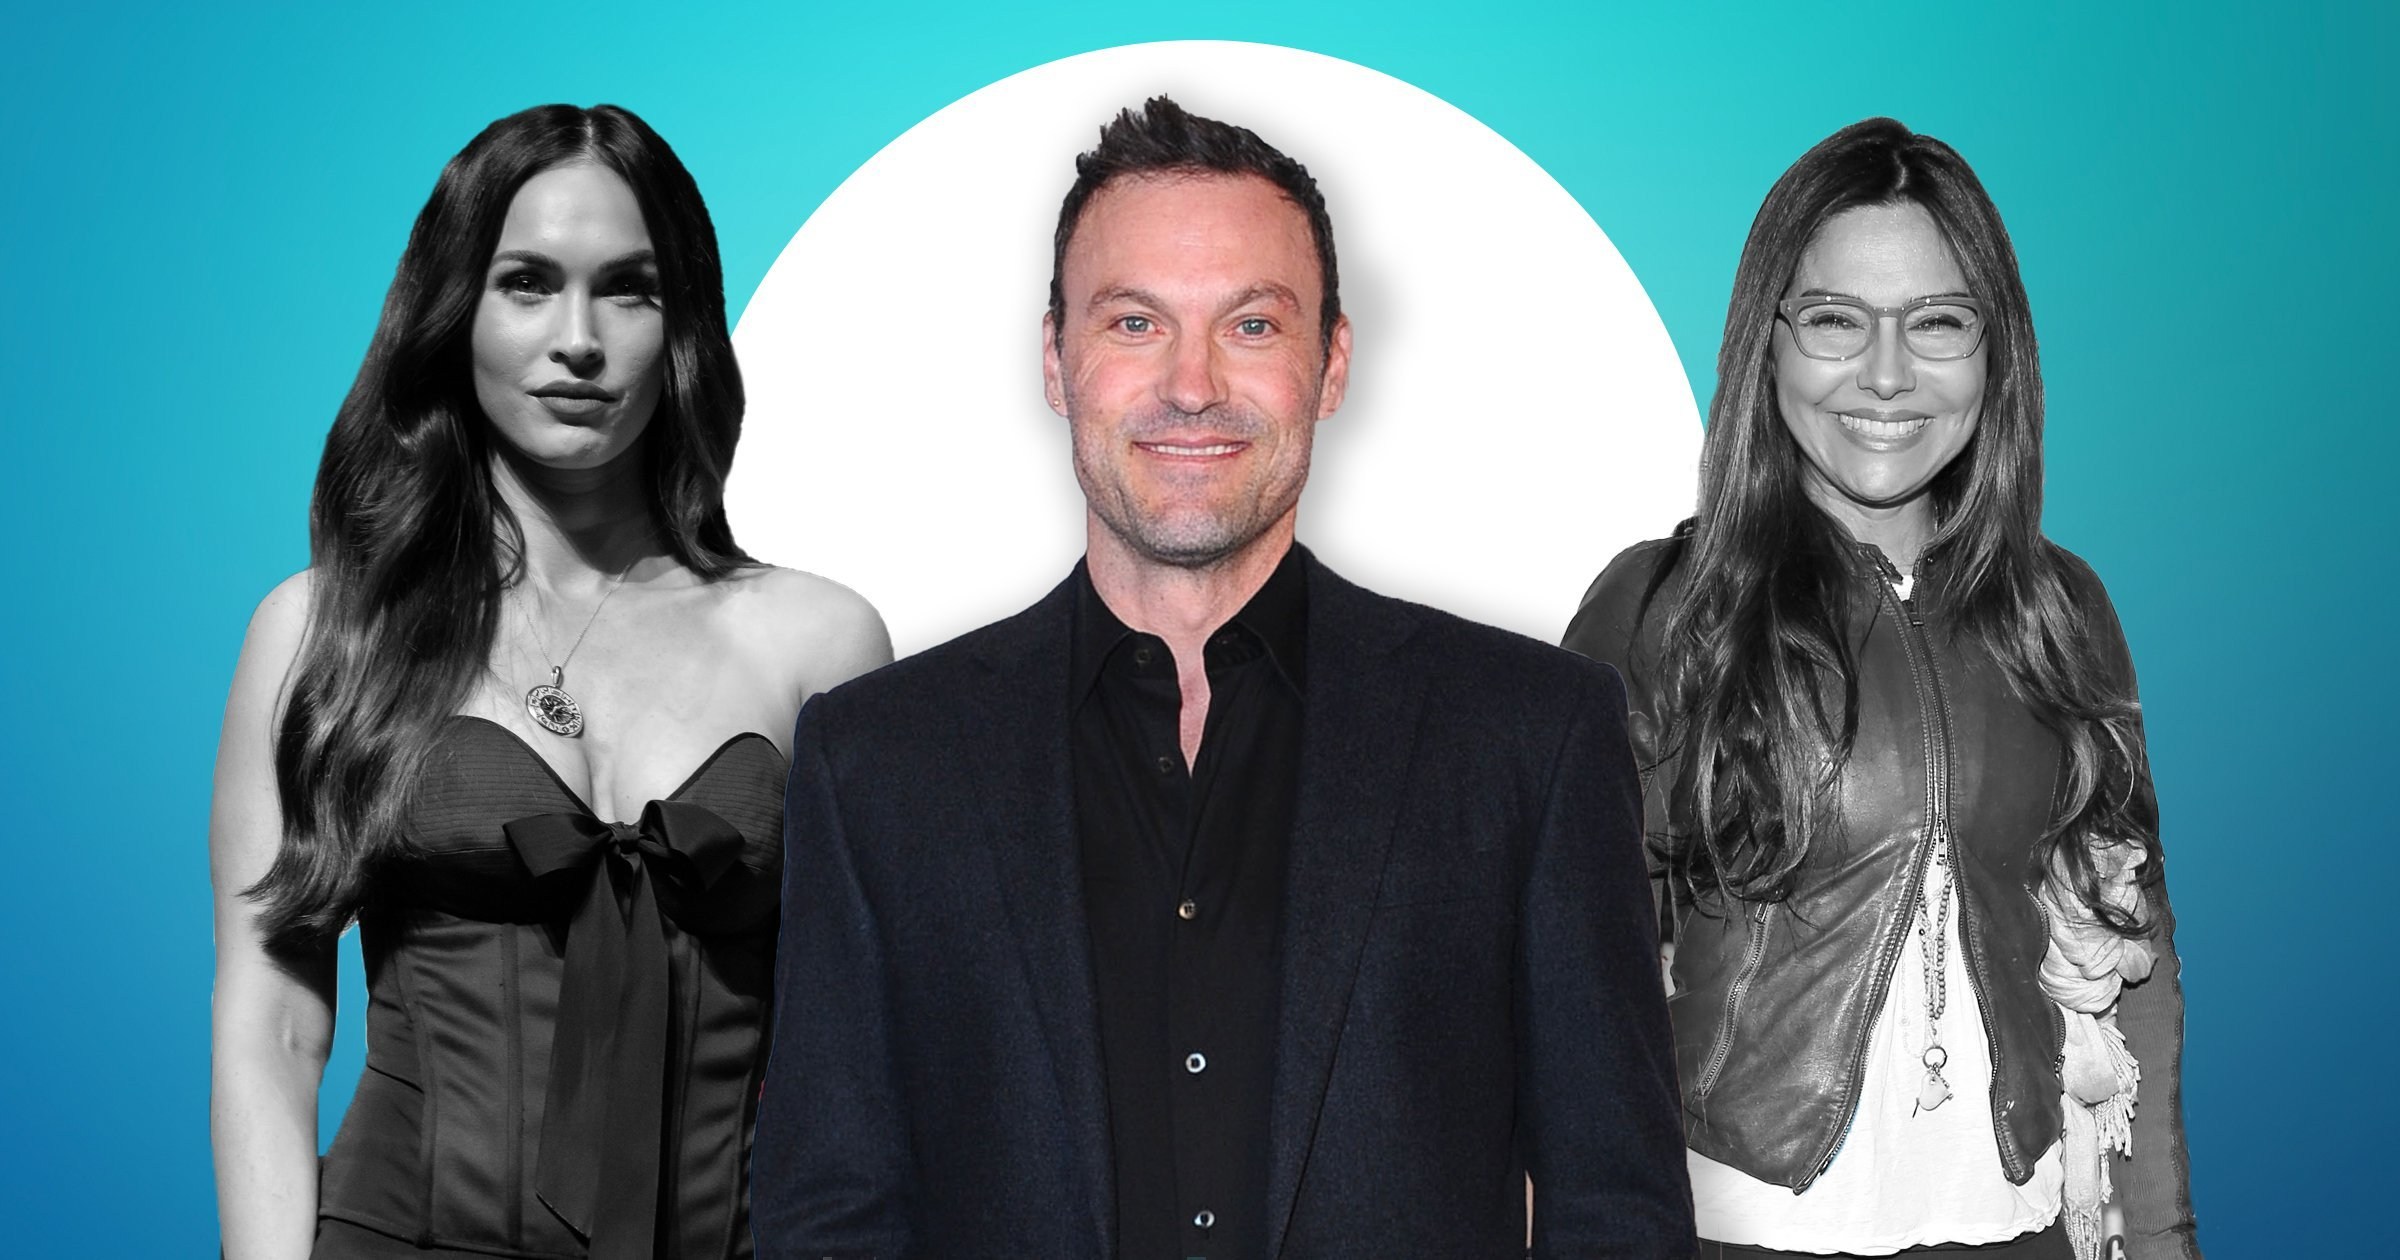 Brian Austin Green’s ex Vanessa Marcil says ‘truth always comes out’ after Megan Fox backlash